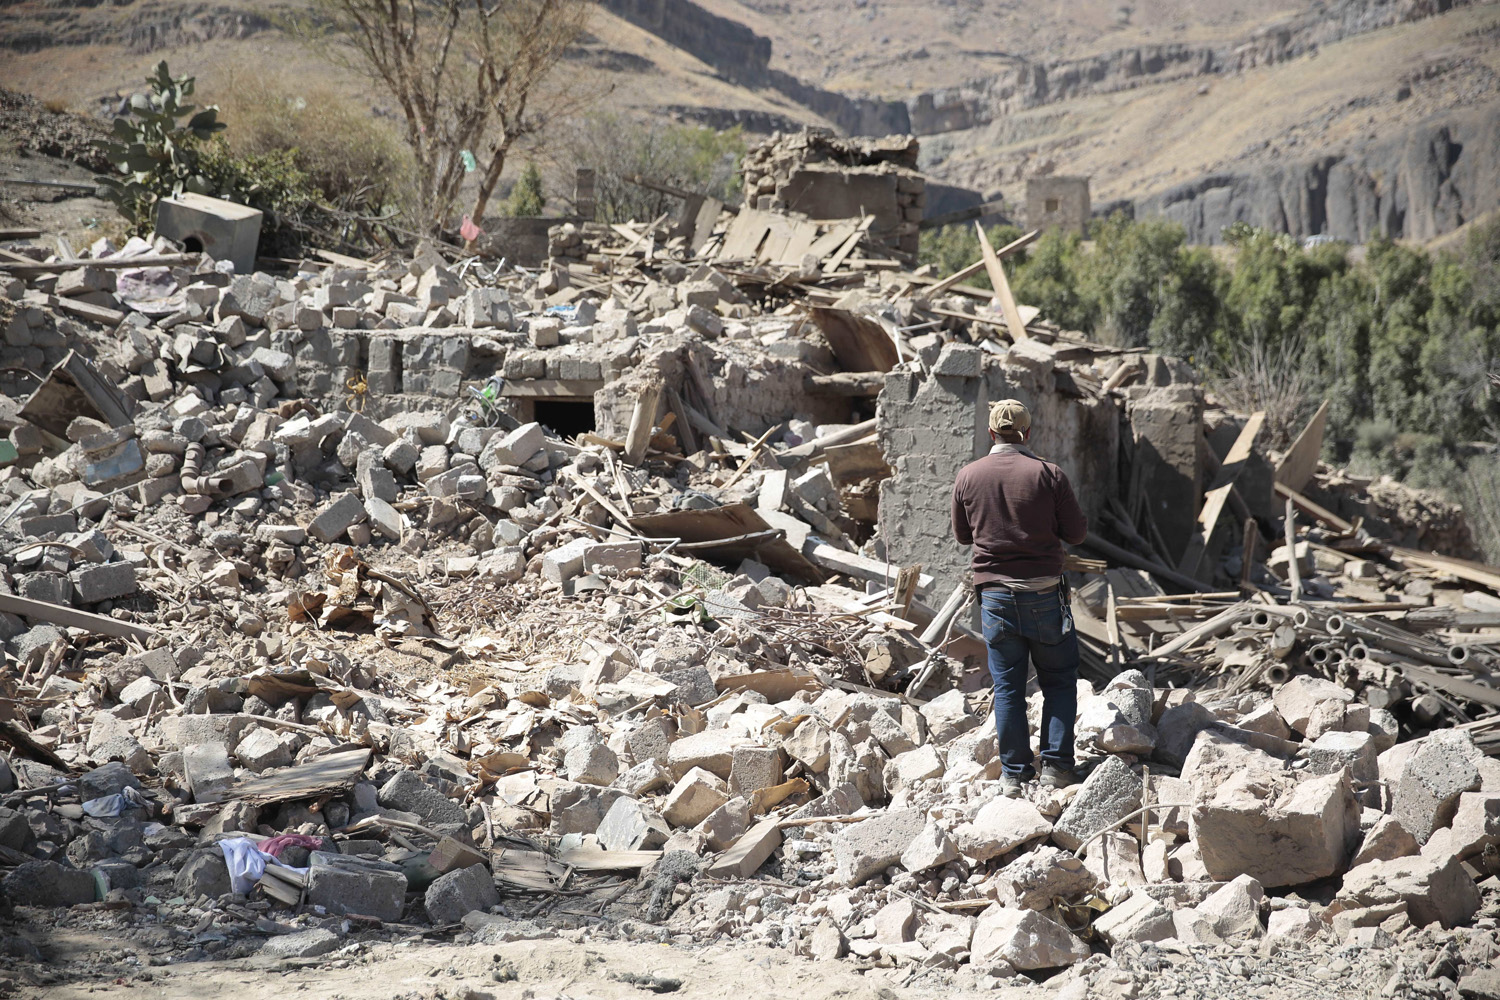 A man walks amid the rubble of a house destroyed by a Saudi-led airstrike on the outskirts of Sanaa, Yemen. (Hani Mohammed/AP)